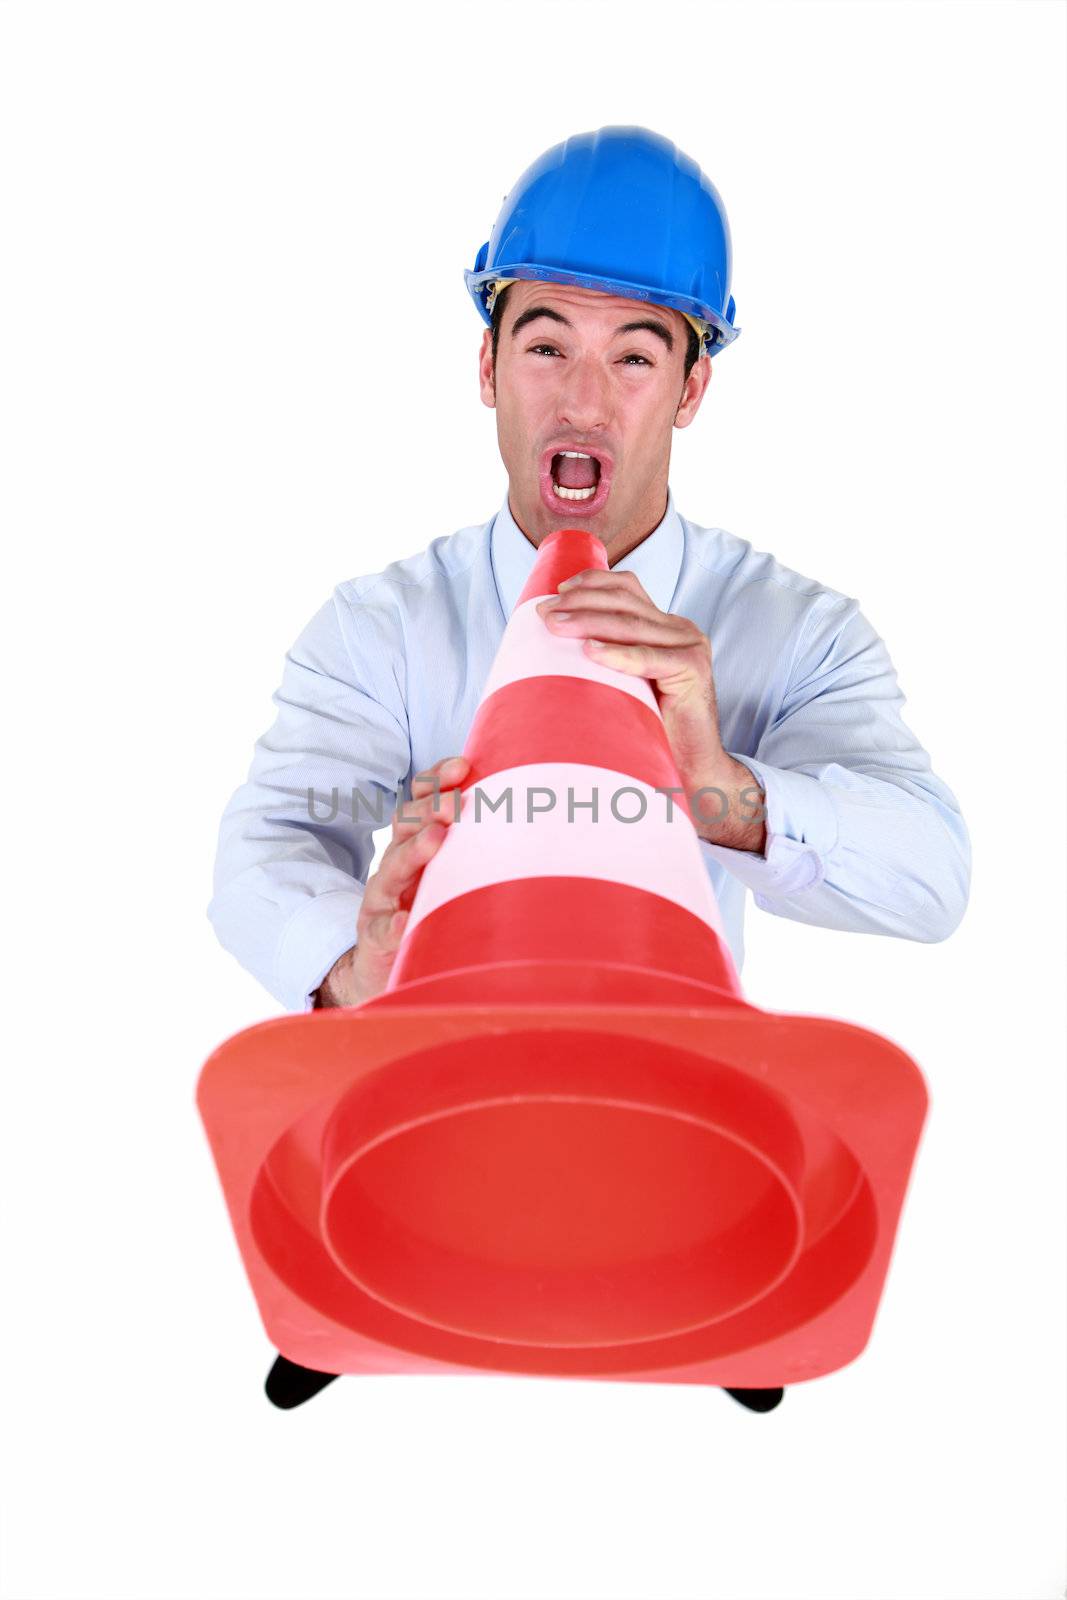 Man shouting into traffic cone by phovoir